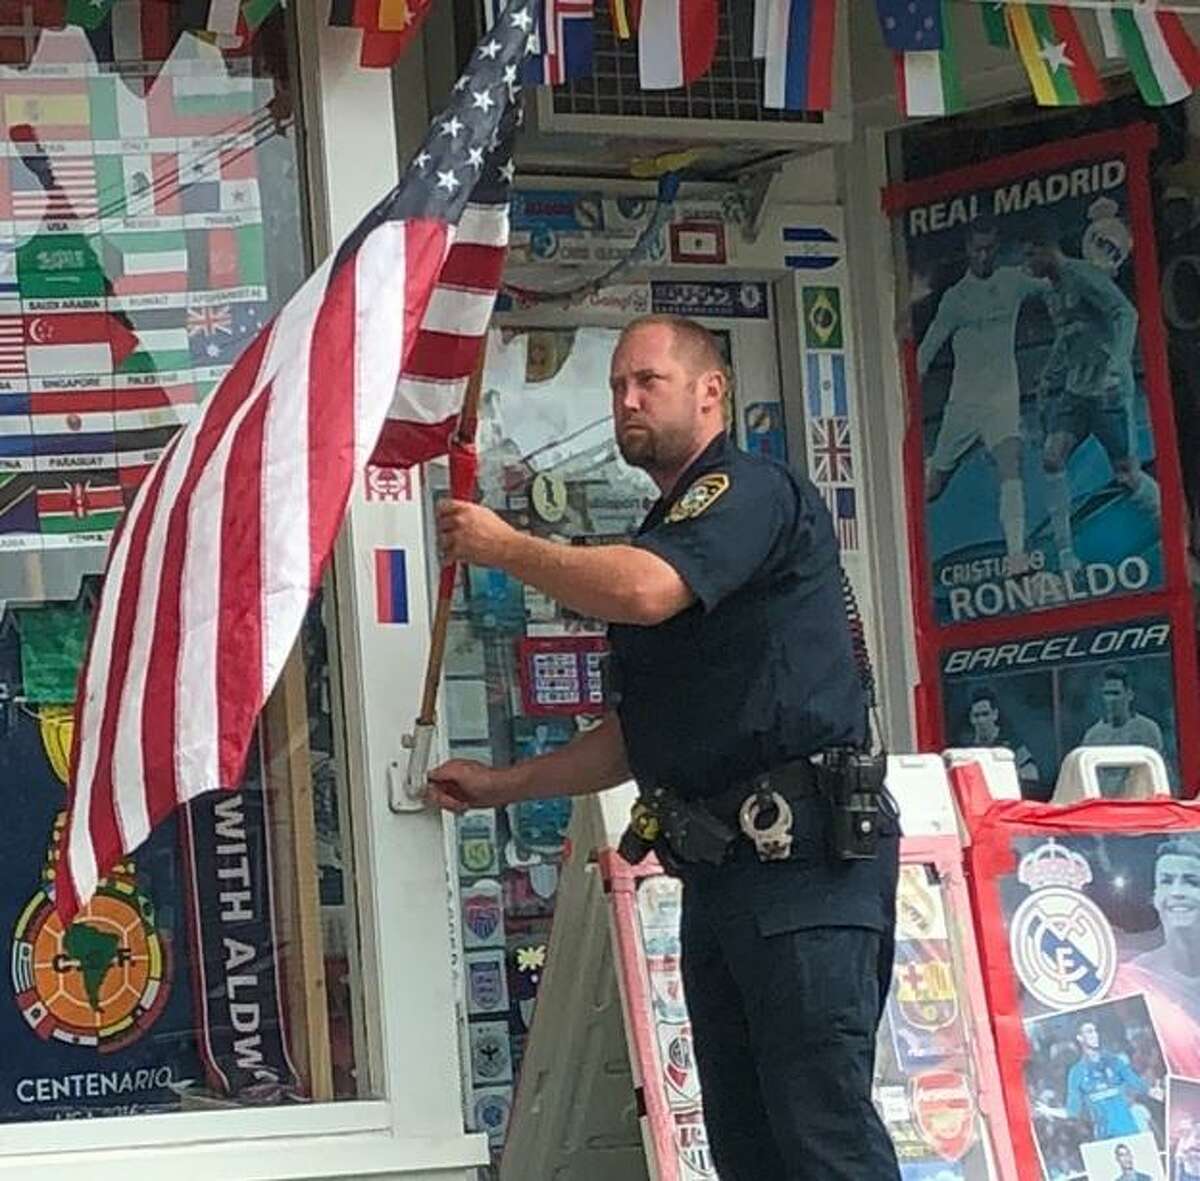 Norwalk Police Officer David Peterson puts an American flag back into the flagpole bracket at the at Soccer Aldwin store at 21 First St. in Norwalk on Sunday, July 22, 2018. The photo was taken by Marc D’Amelio and shared with the Norwalk Police Department.